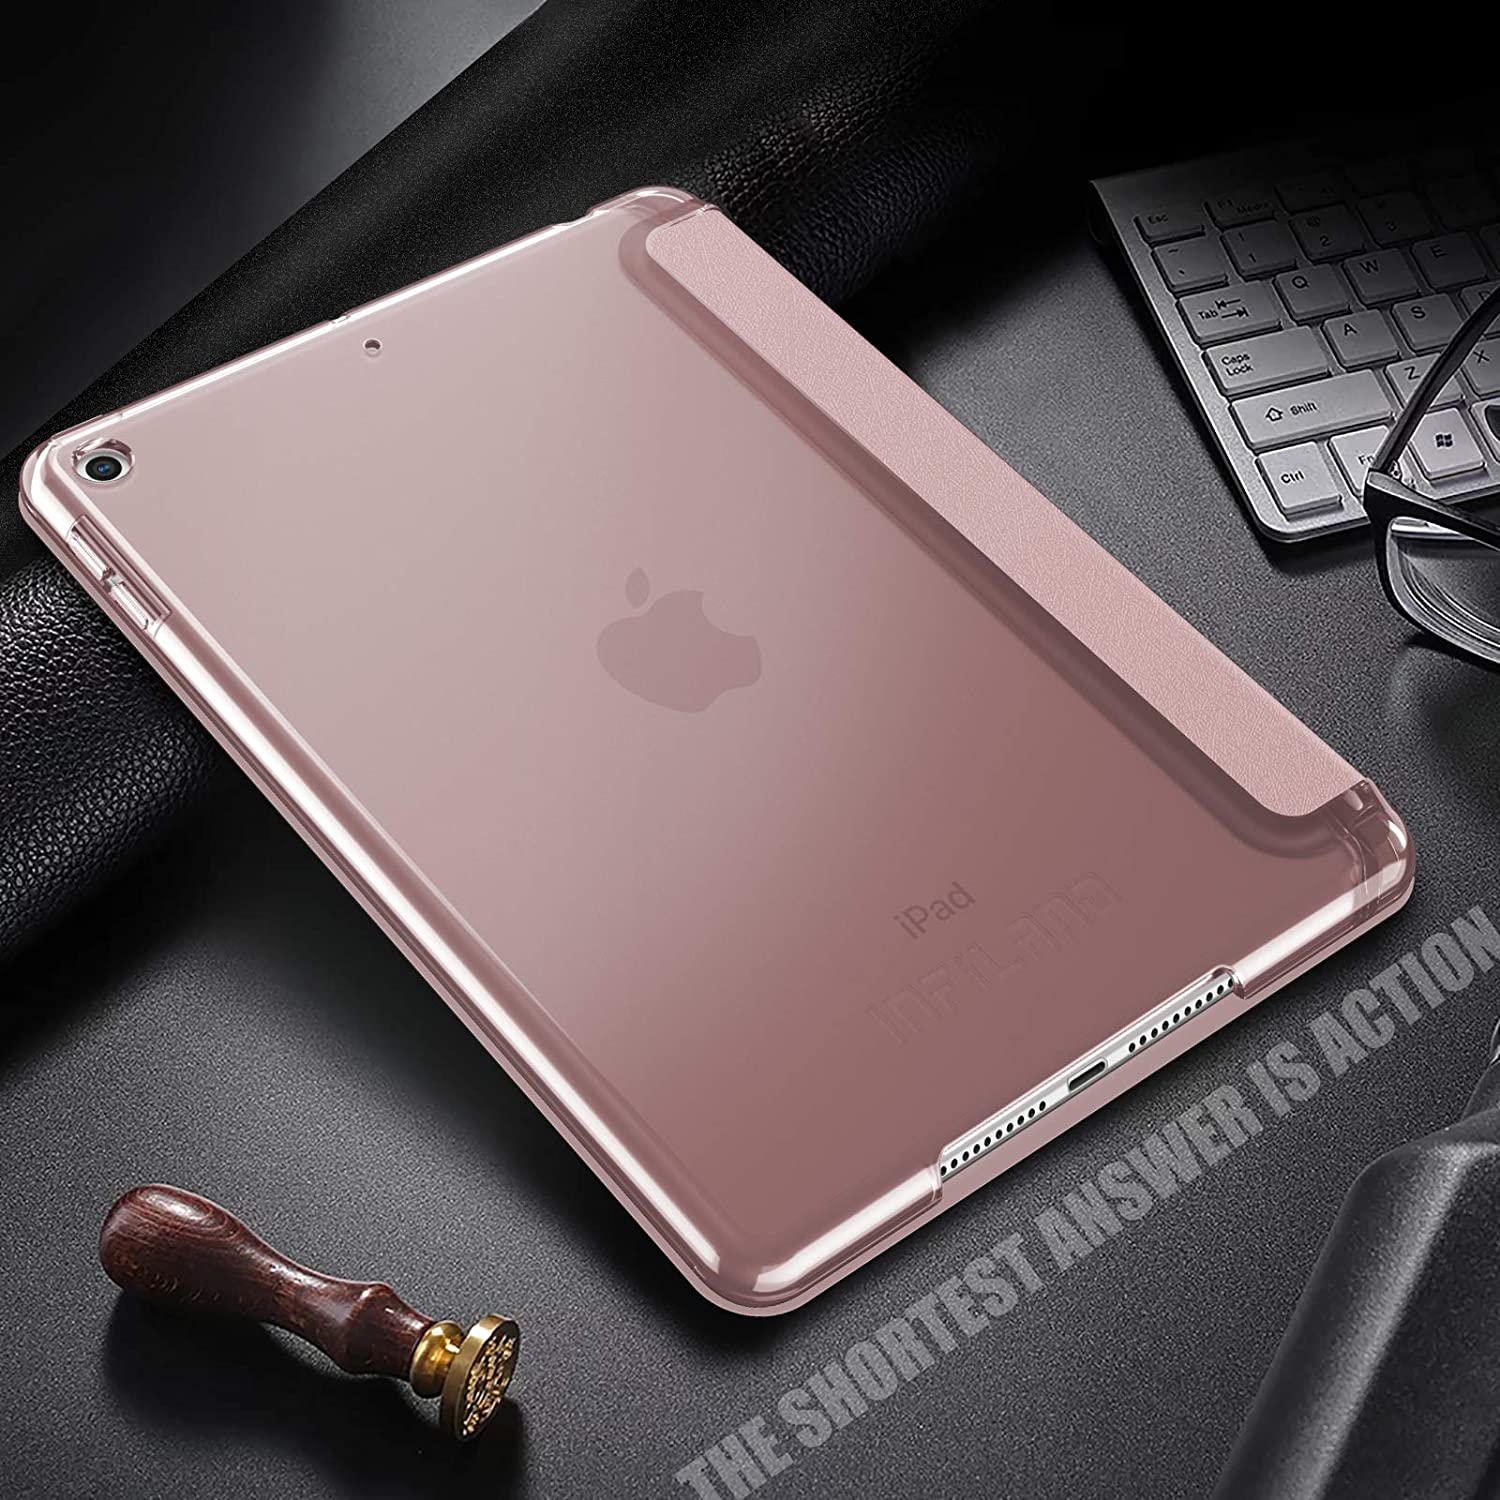 Infiland Case for New iPad Mini 5, Ultra Slim Lightweight Stand Case with Translucent Frosted Back Smart Cover  - ROSE GOLD - e4cents